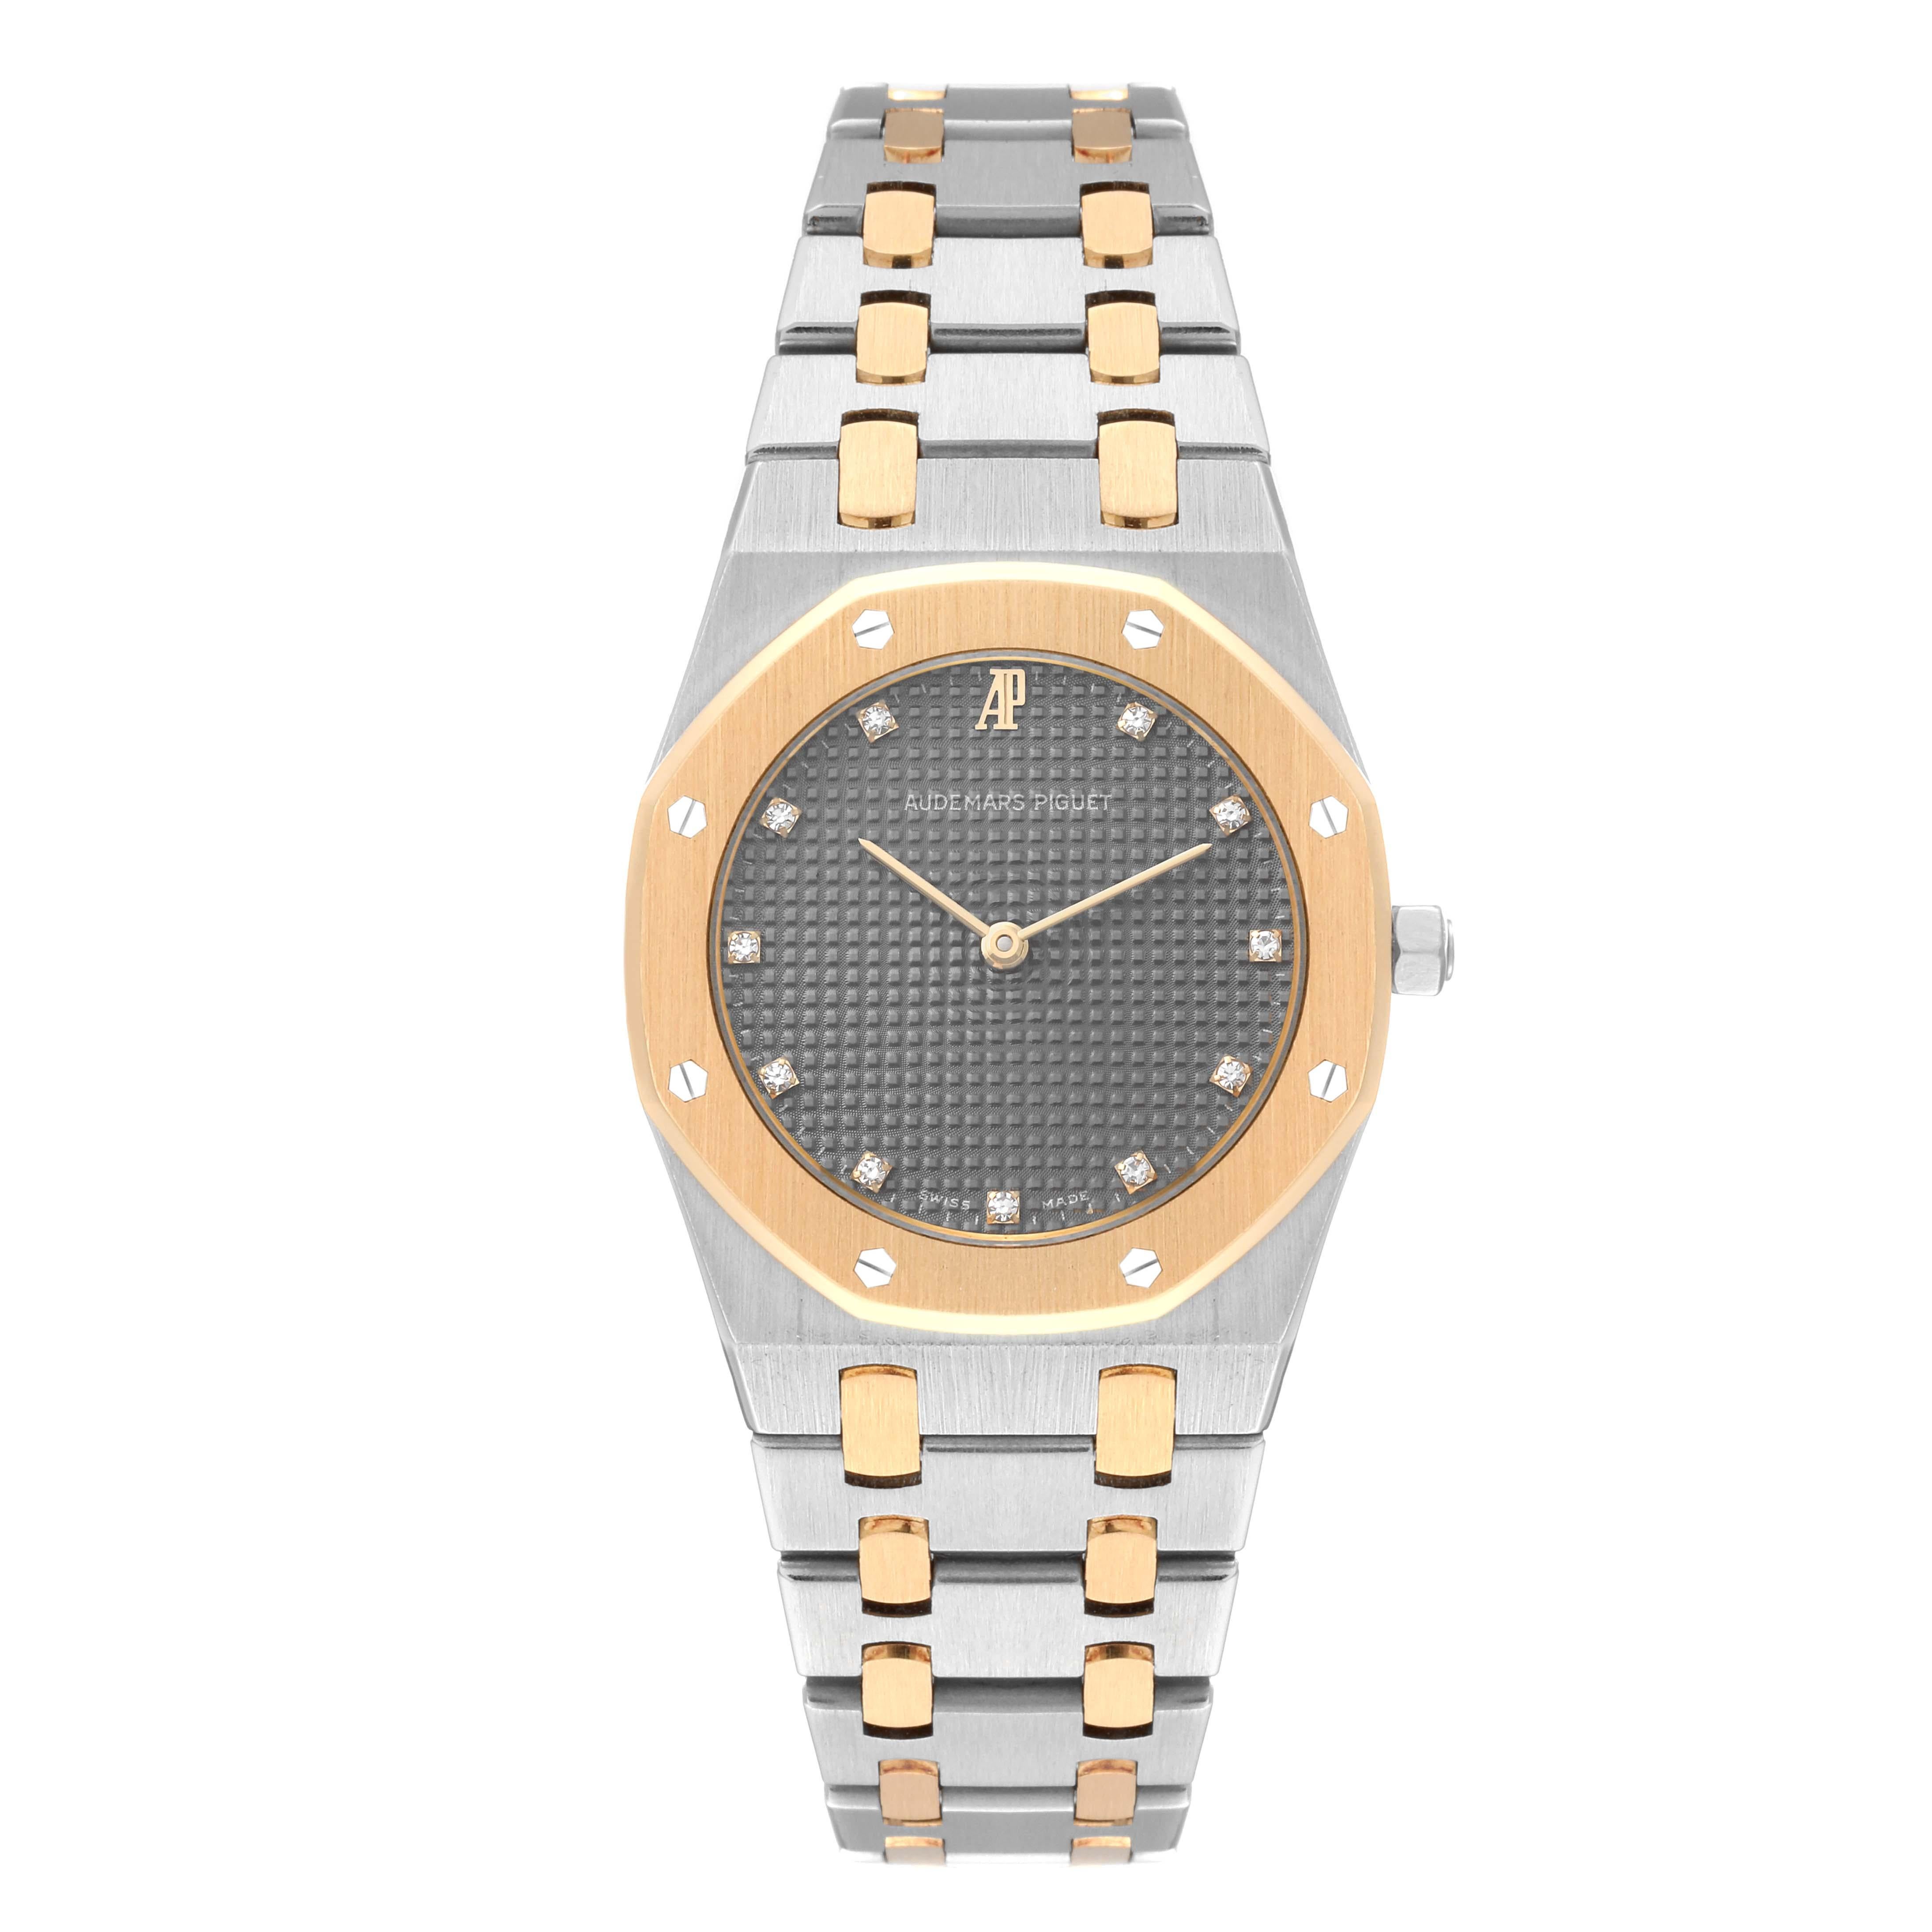 Audemars Piguet Royal Oak Steel Yellow Gold Mens Watch 56303SA. Quartz movement. Stainless steel case 33.0 mm in diameter. 18k yellow gold bezel punctuated with 8 signature screws. Scratch resistant sapphire crystal. Grey Tapisserie waffle pattern